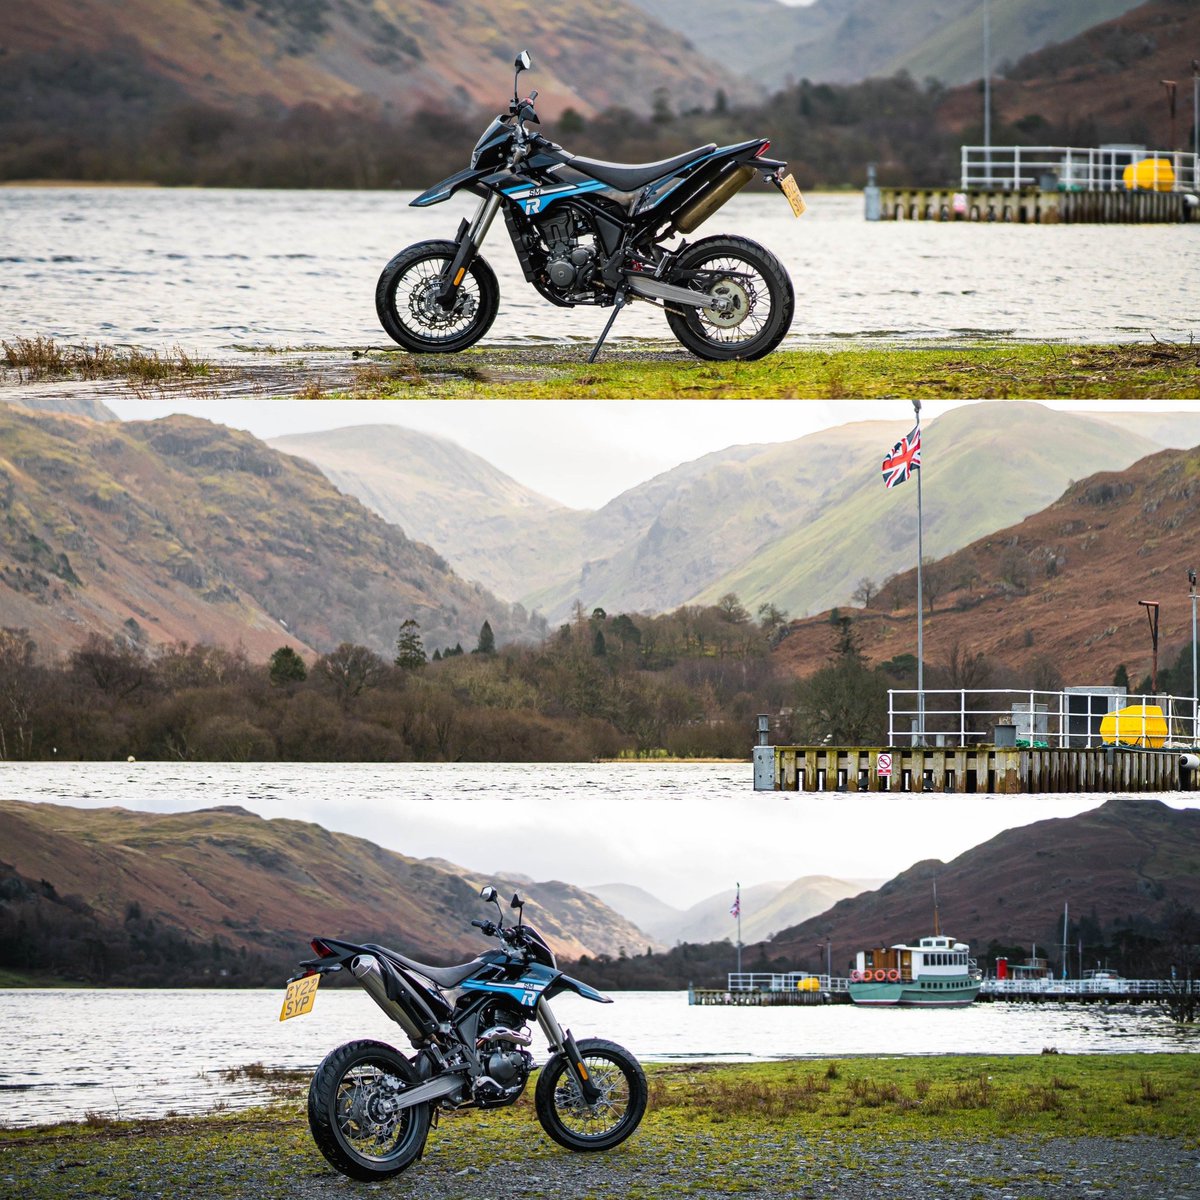 Exploring the Lakes with @sinnismotorcycles 

#sinnismotorcycles #sinnissmr #sinnisapache #supermoto #supermotonation #supermotolife #motorcyclephotography #photography #moto #motorcycle #super #instagood #bikerzone #125cc #braap #motorbike #motolife #motorcycles #photographer